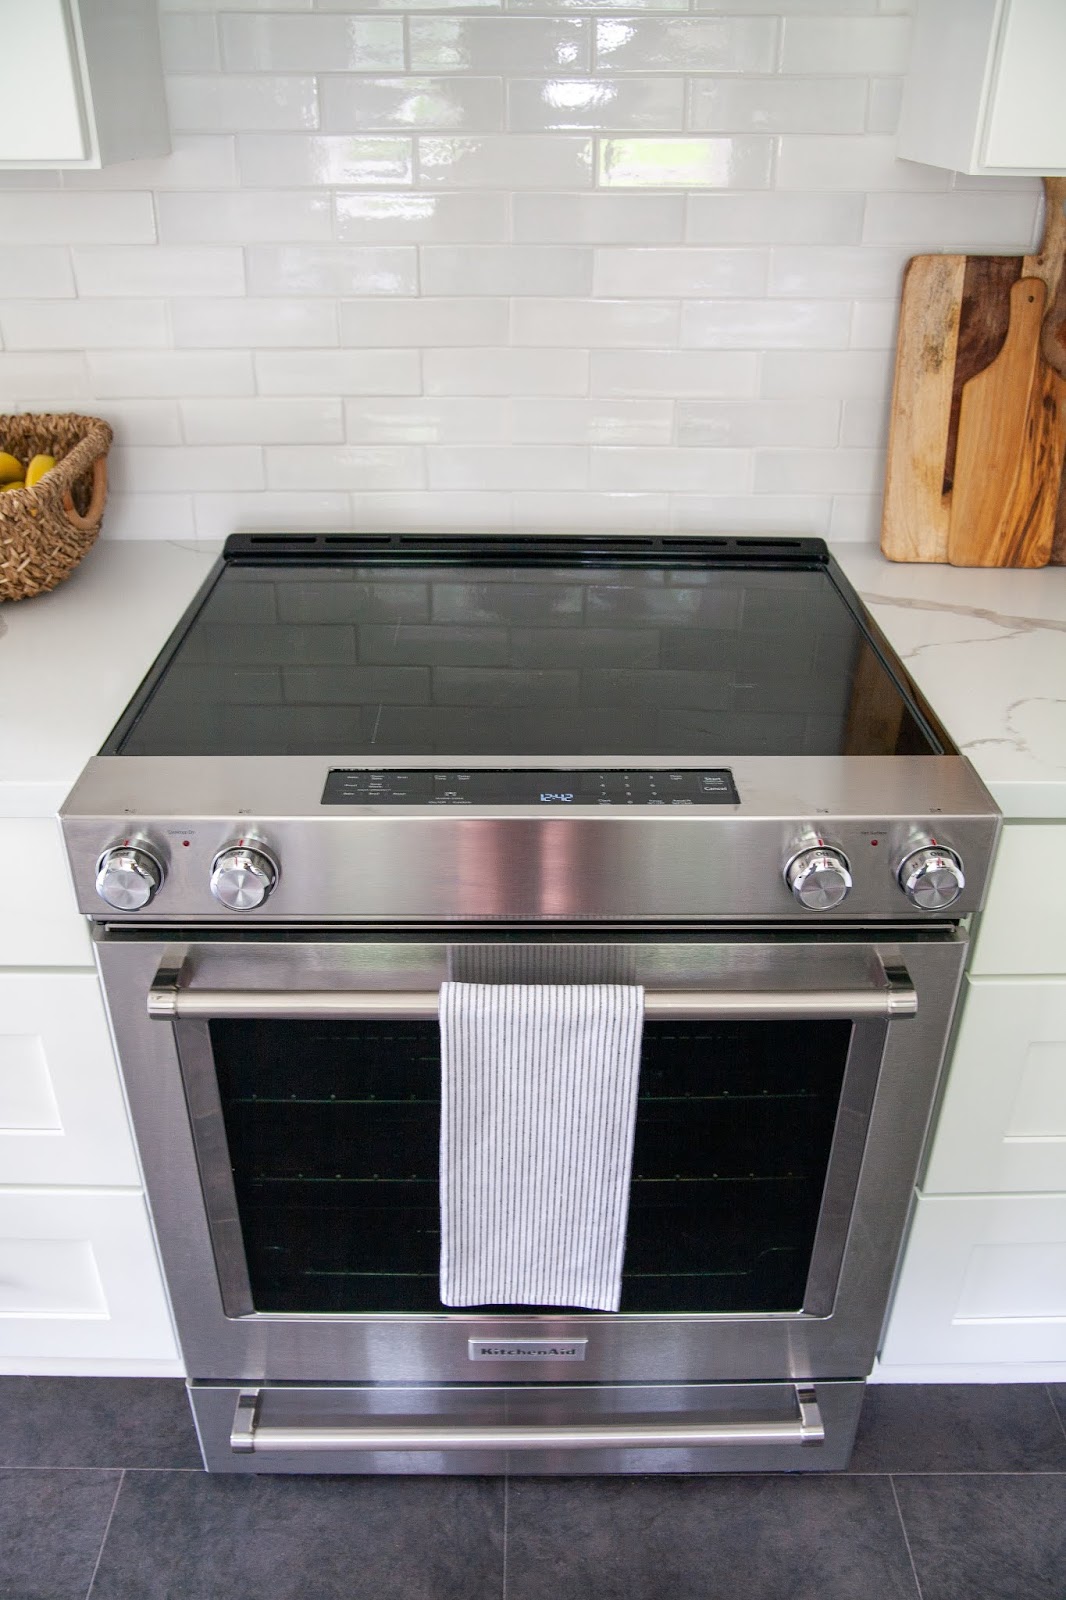 How To Save 4k On Appliances For A Full Kitchen Reno With Sears